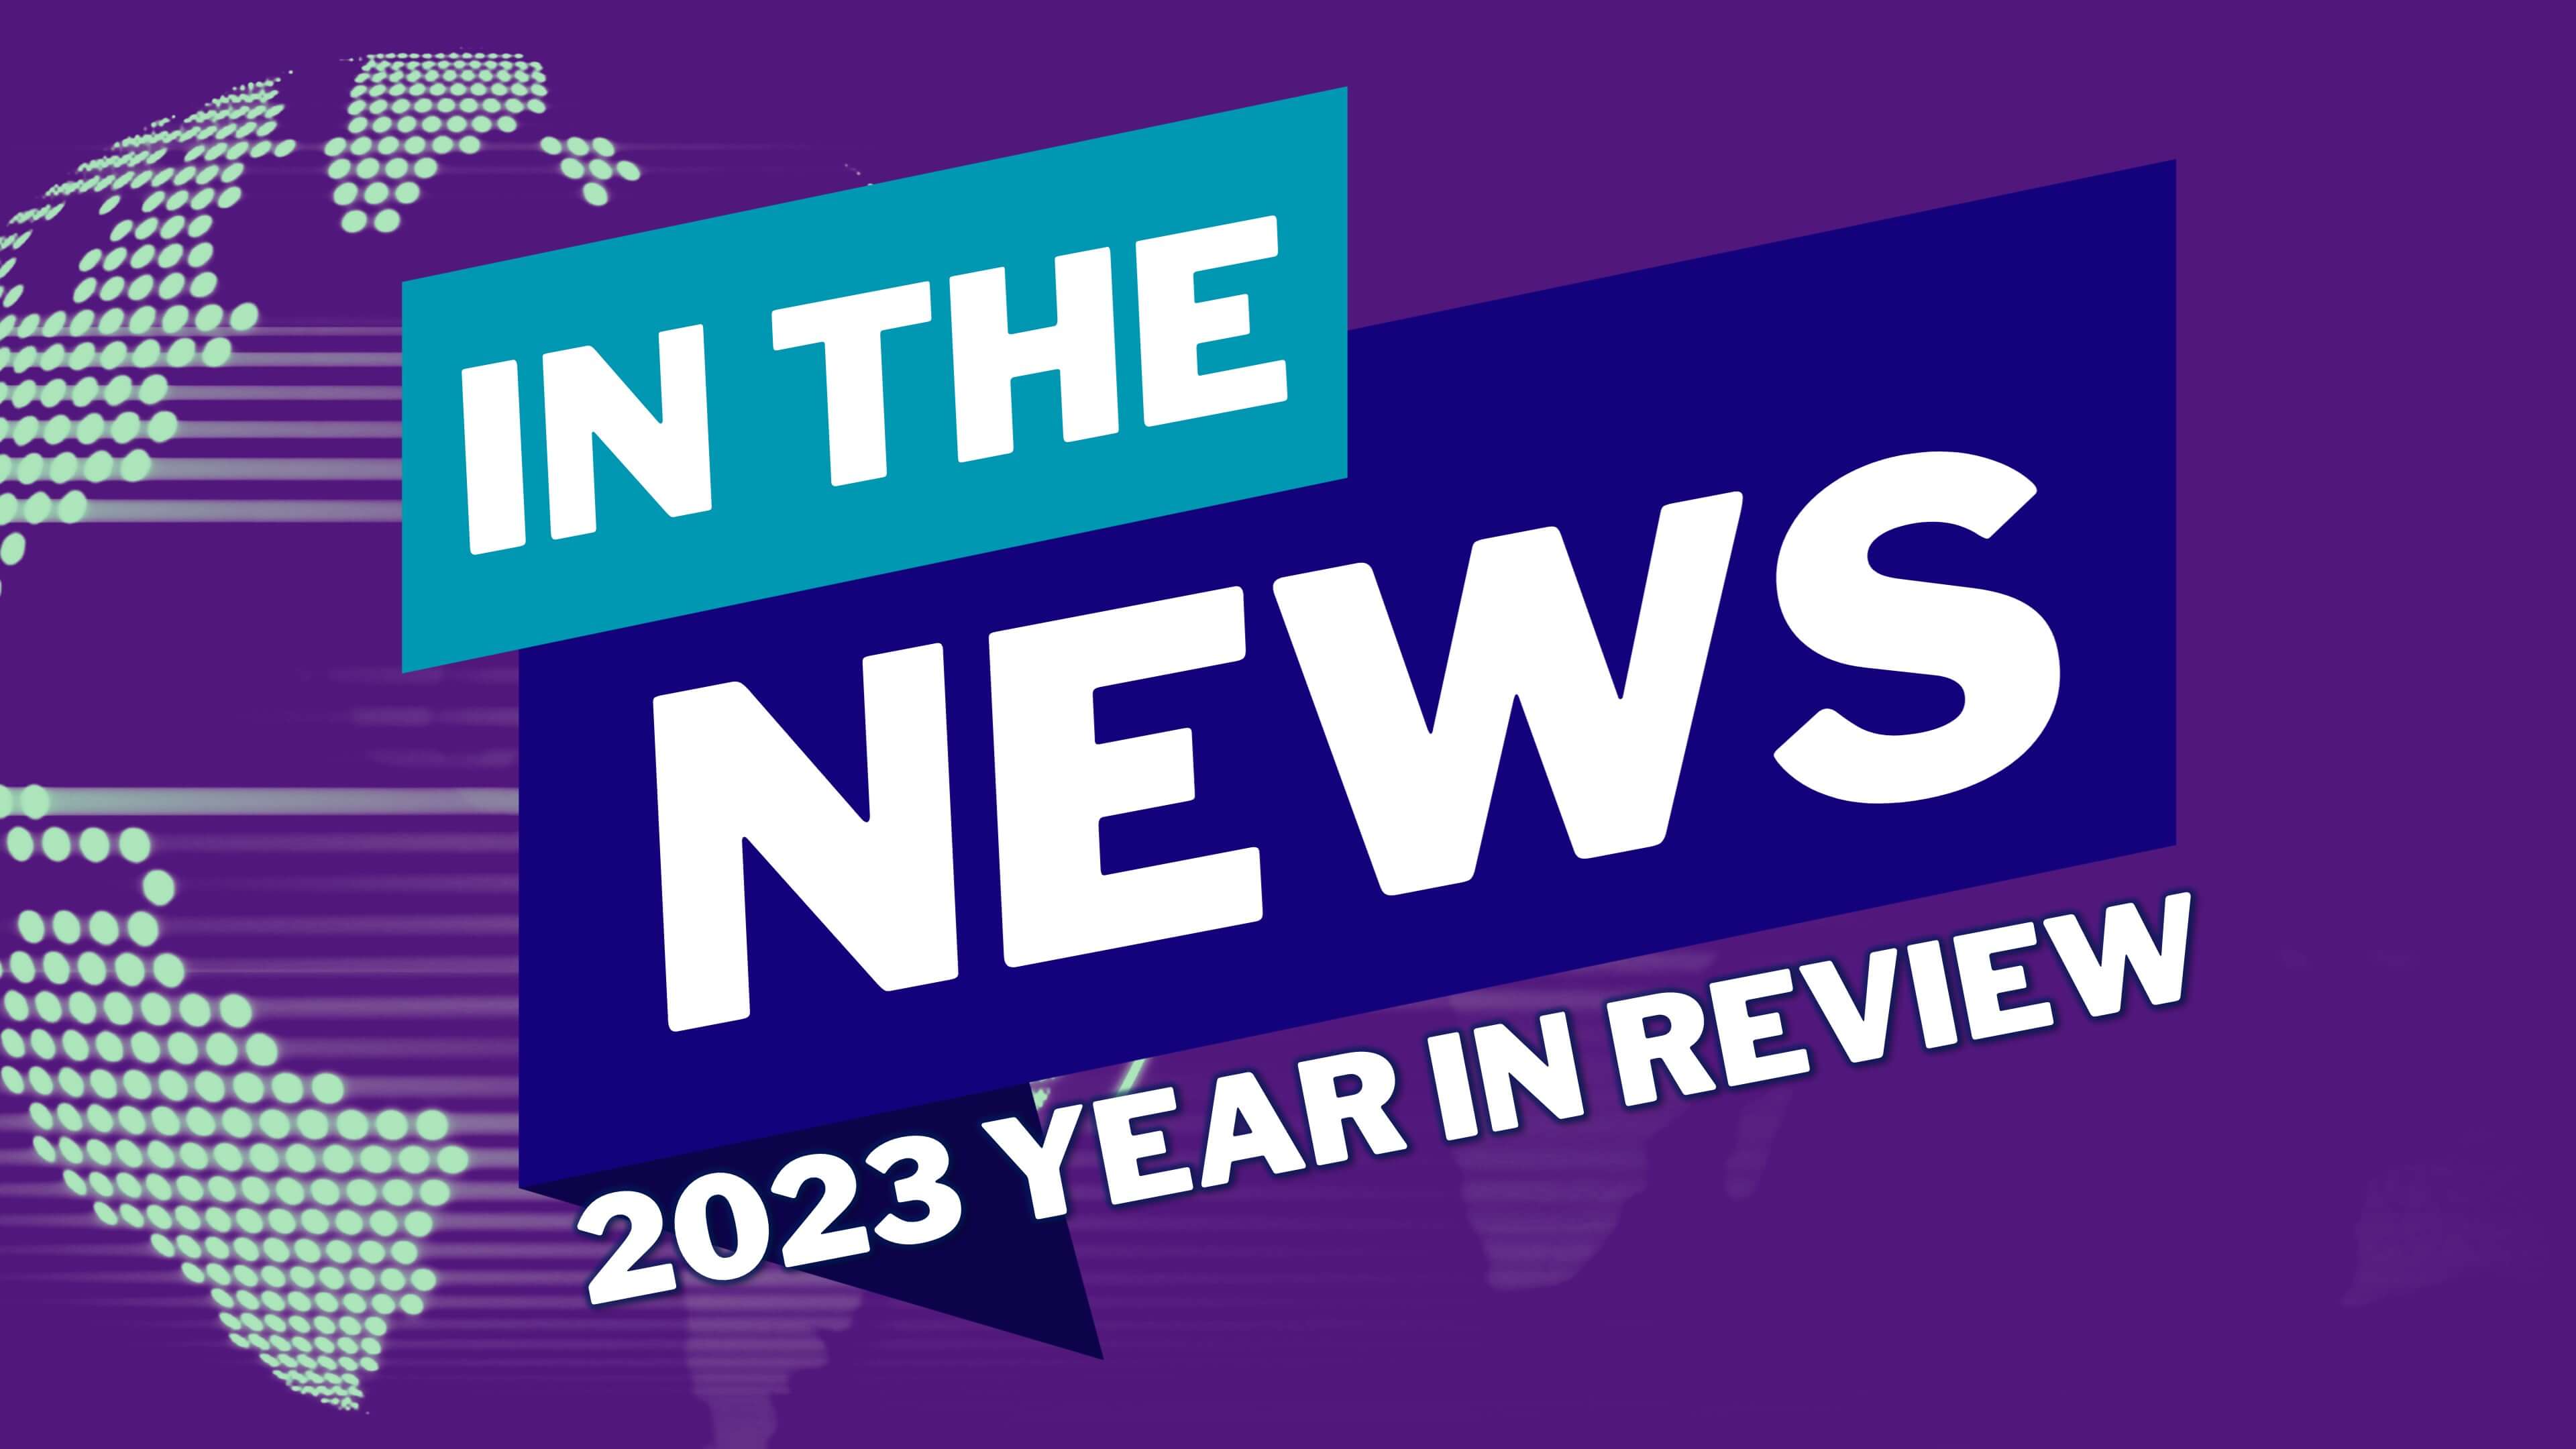 In The News: 2023 Year In Review